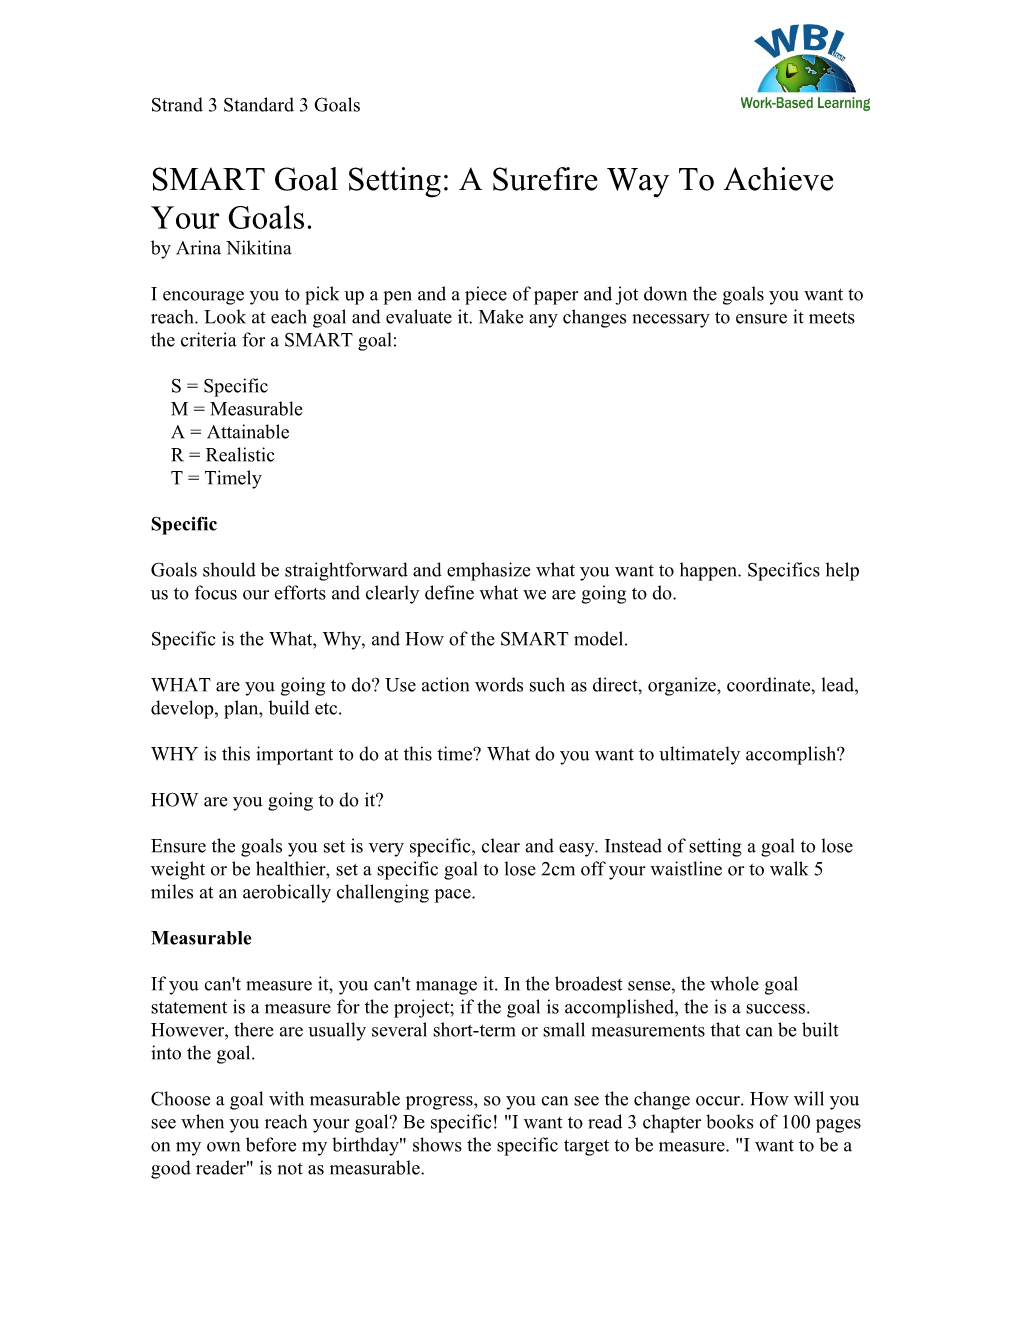 SMART Goal Setting: a Surefire Way to Achieve Your Goals